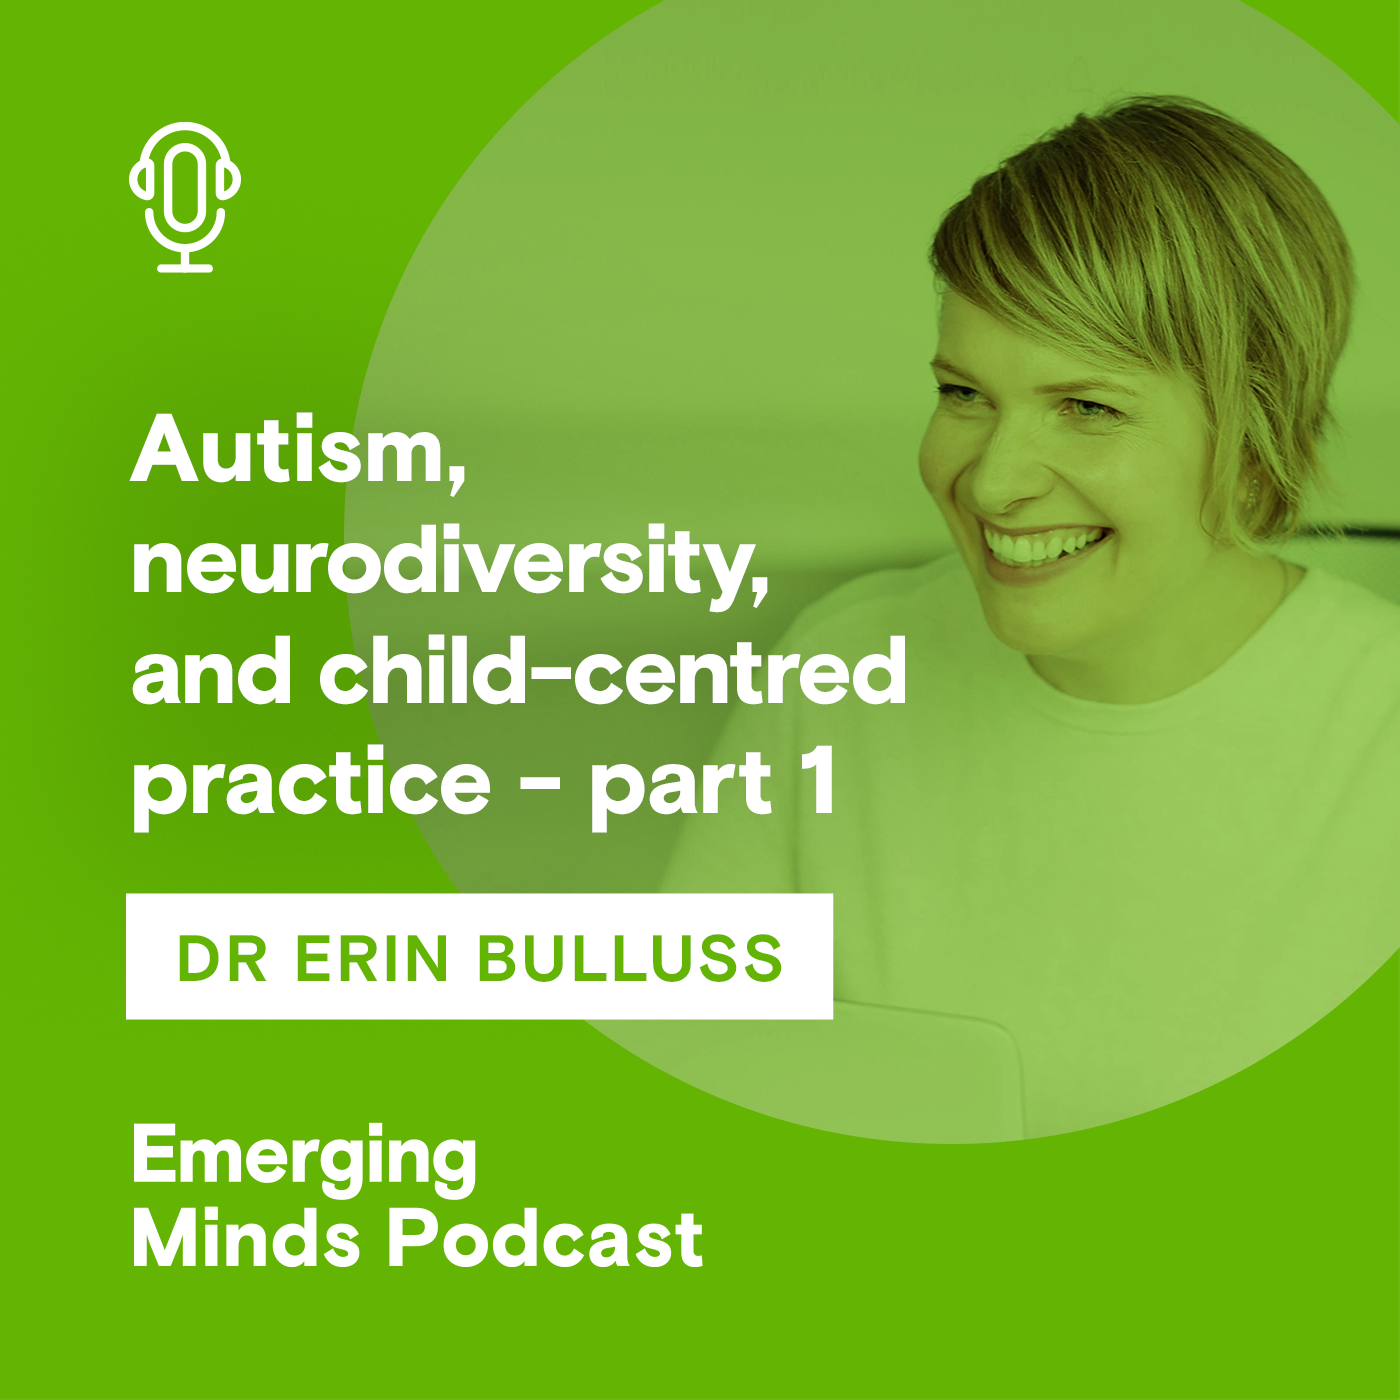 Autism, neurodiversity, and child-centred practice - part one